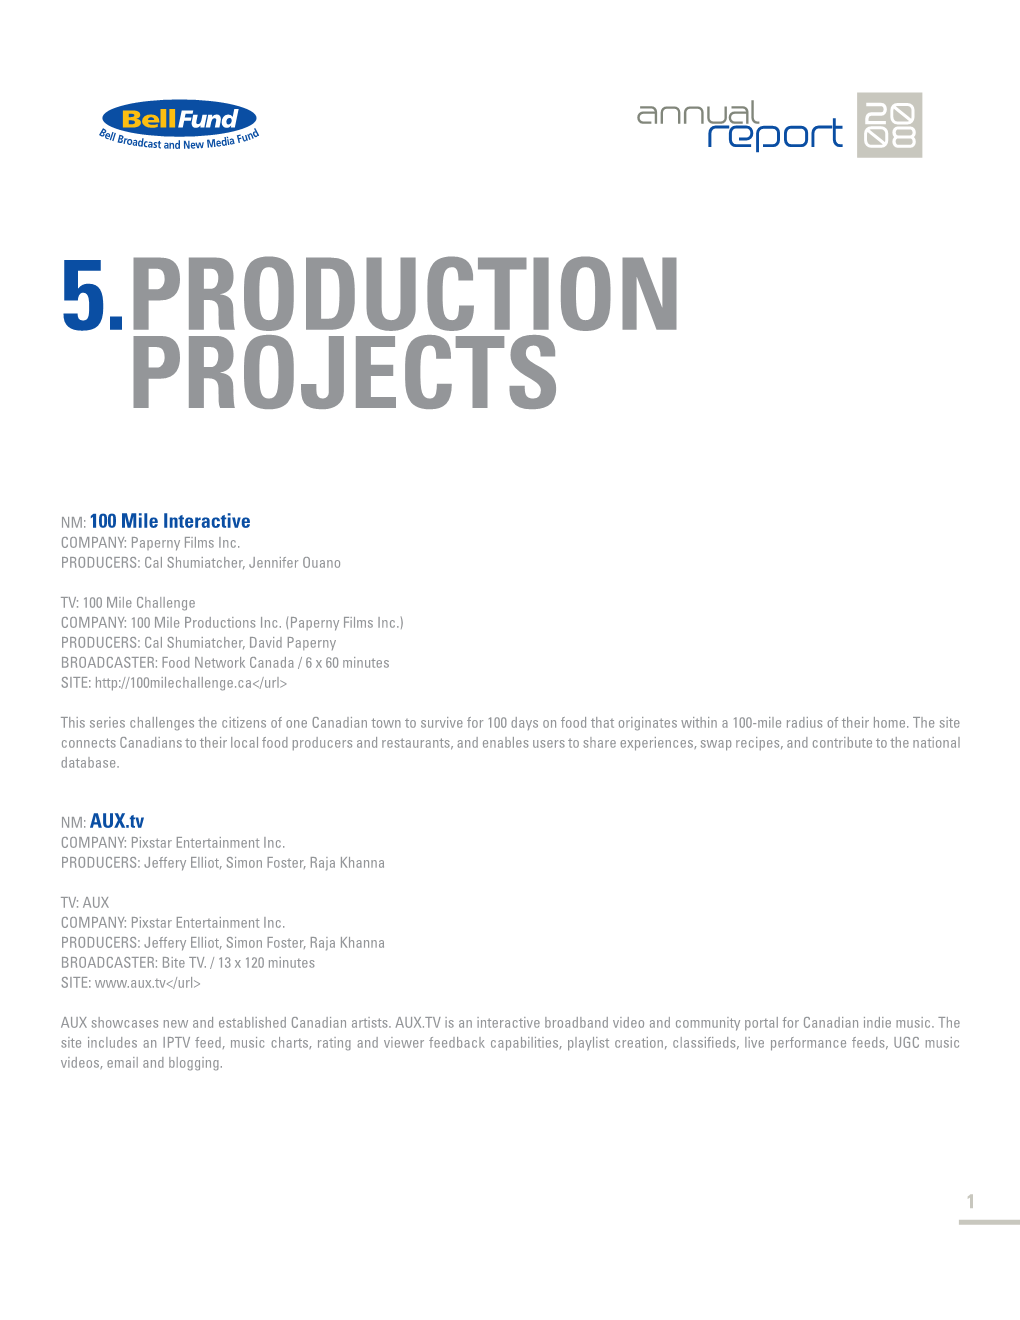 5.Production Projects